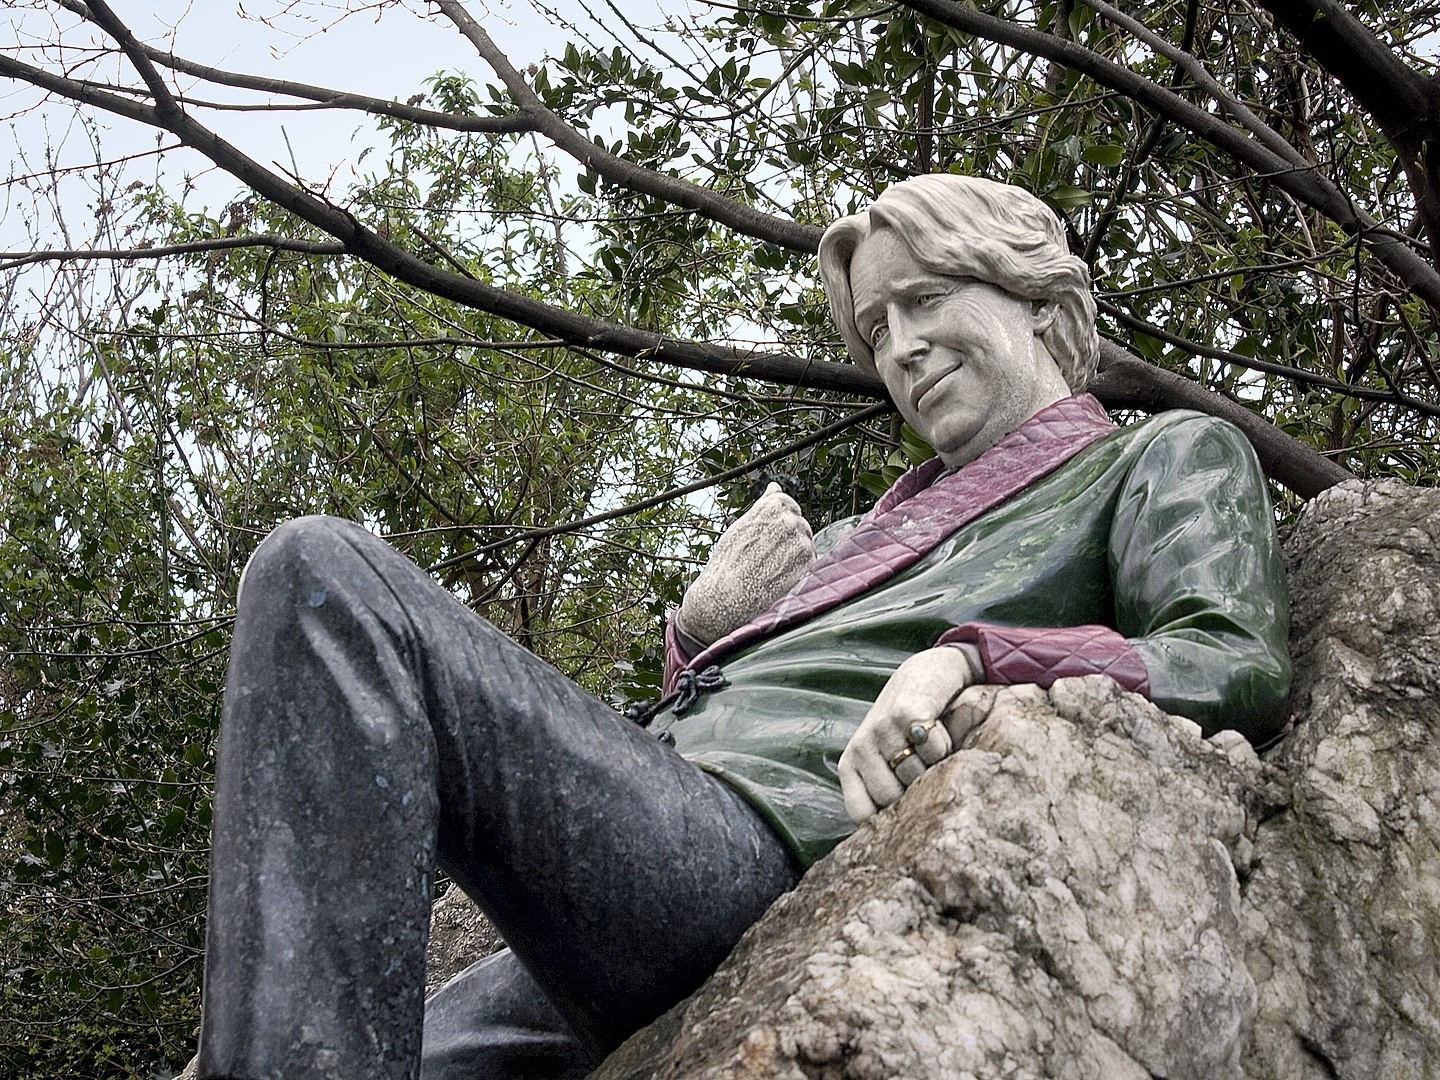 By Stéphane Moussie from Lyon, France - Oscar Wilde Statue, CC BY 2.0, https://commons.wikimedia.org/w/index.php?curid=59074027